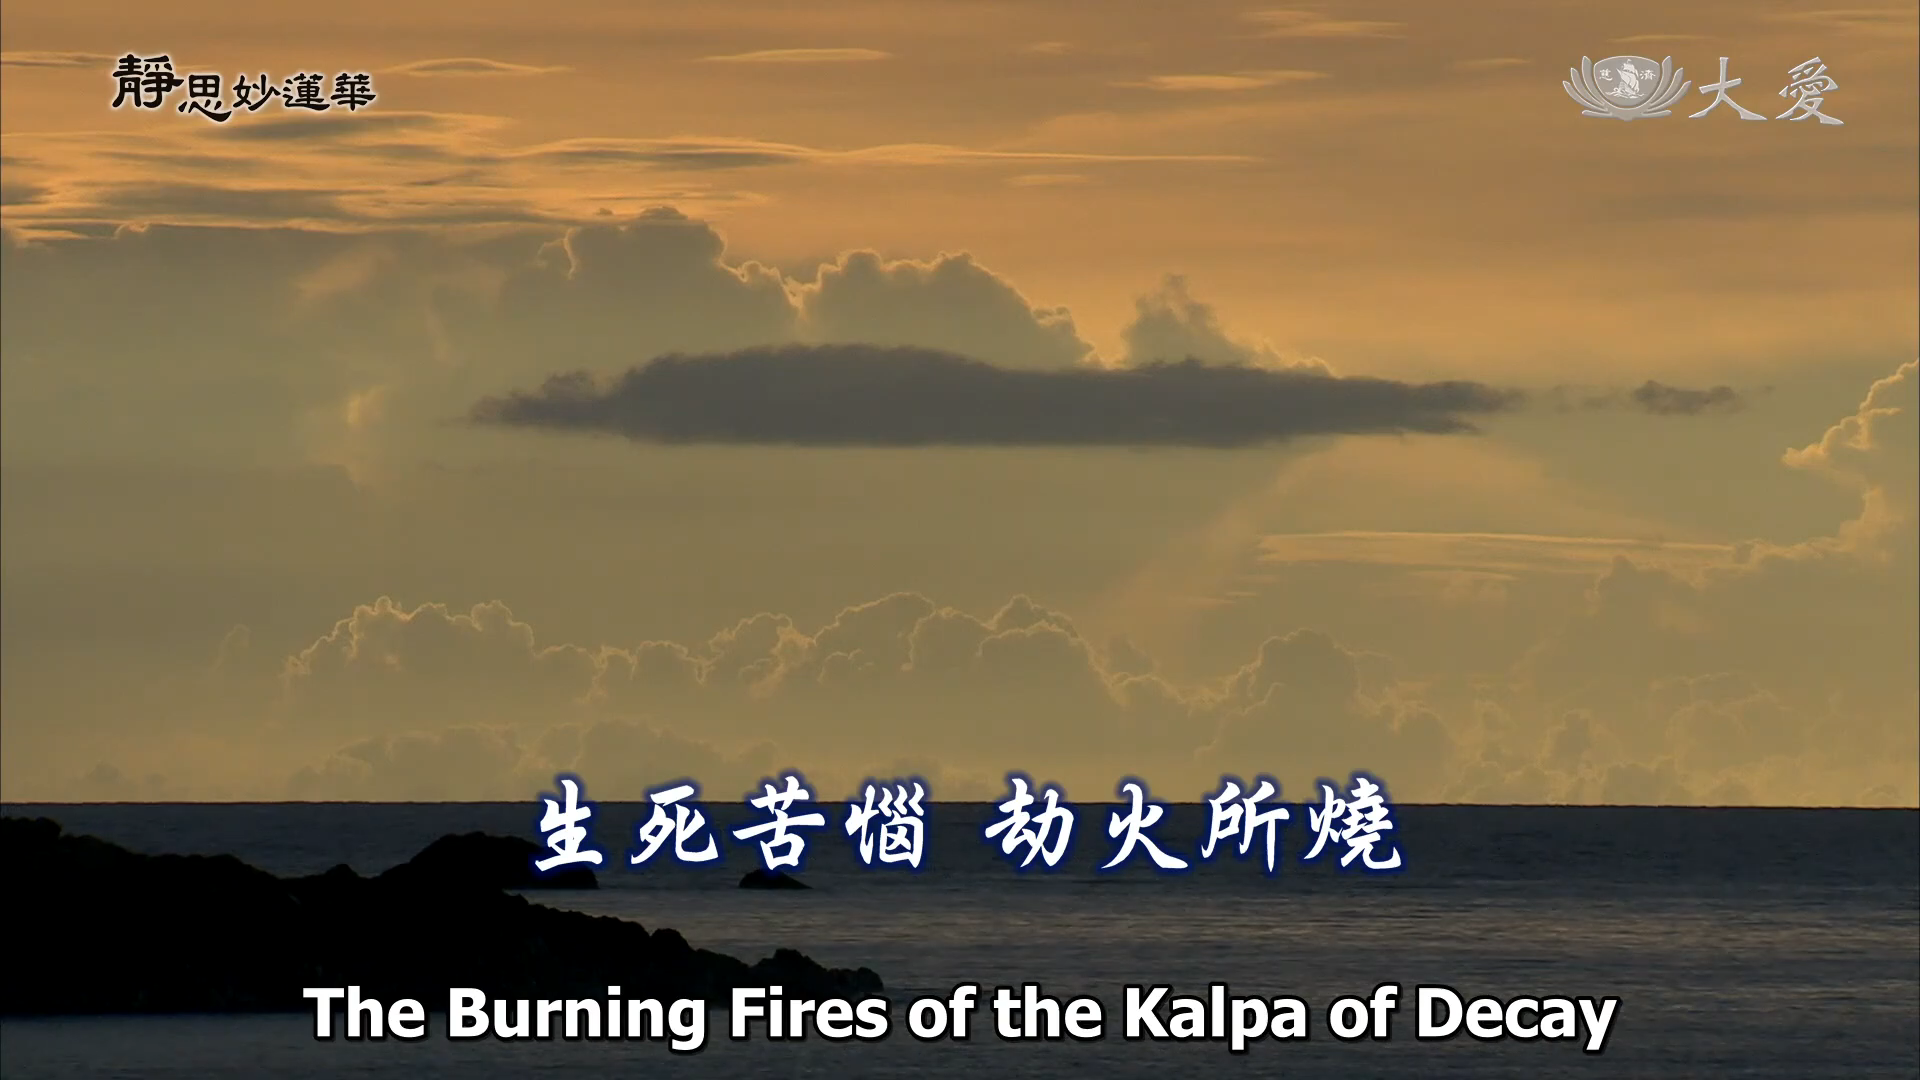 The Burning Fires of the Kalpa of Decay